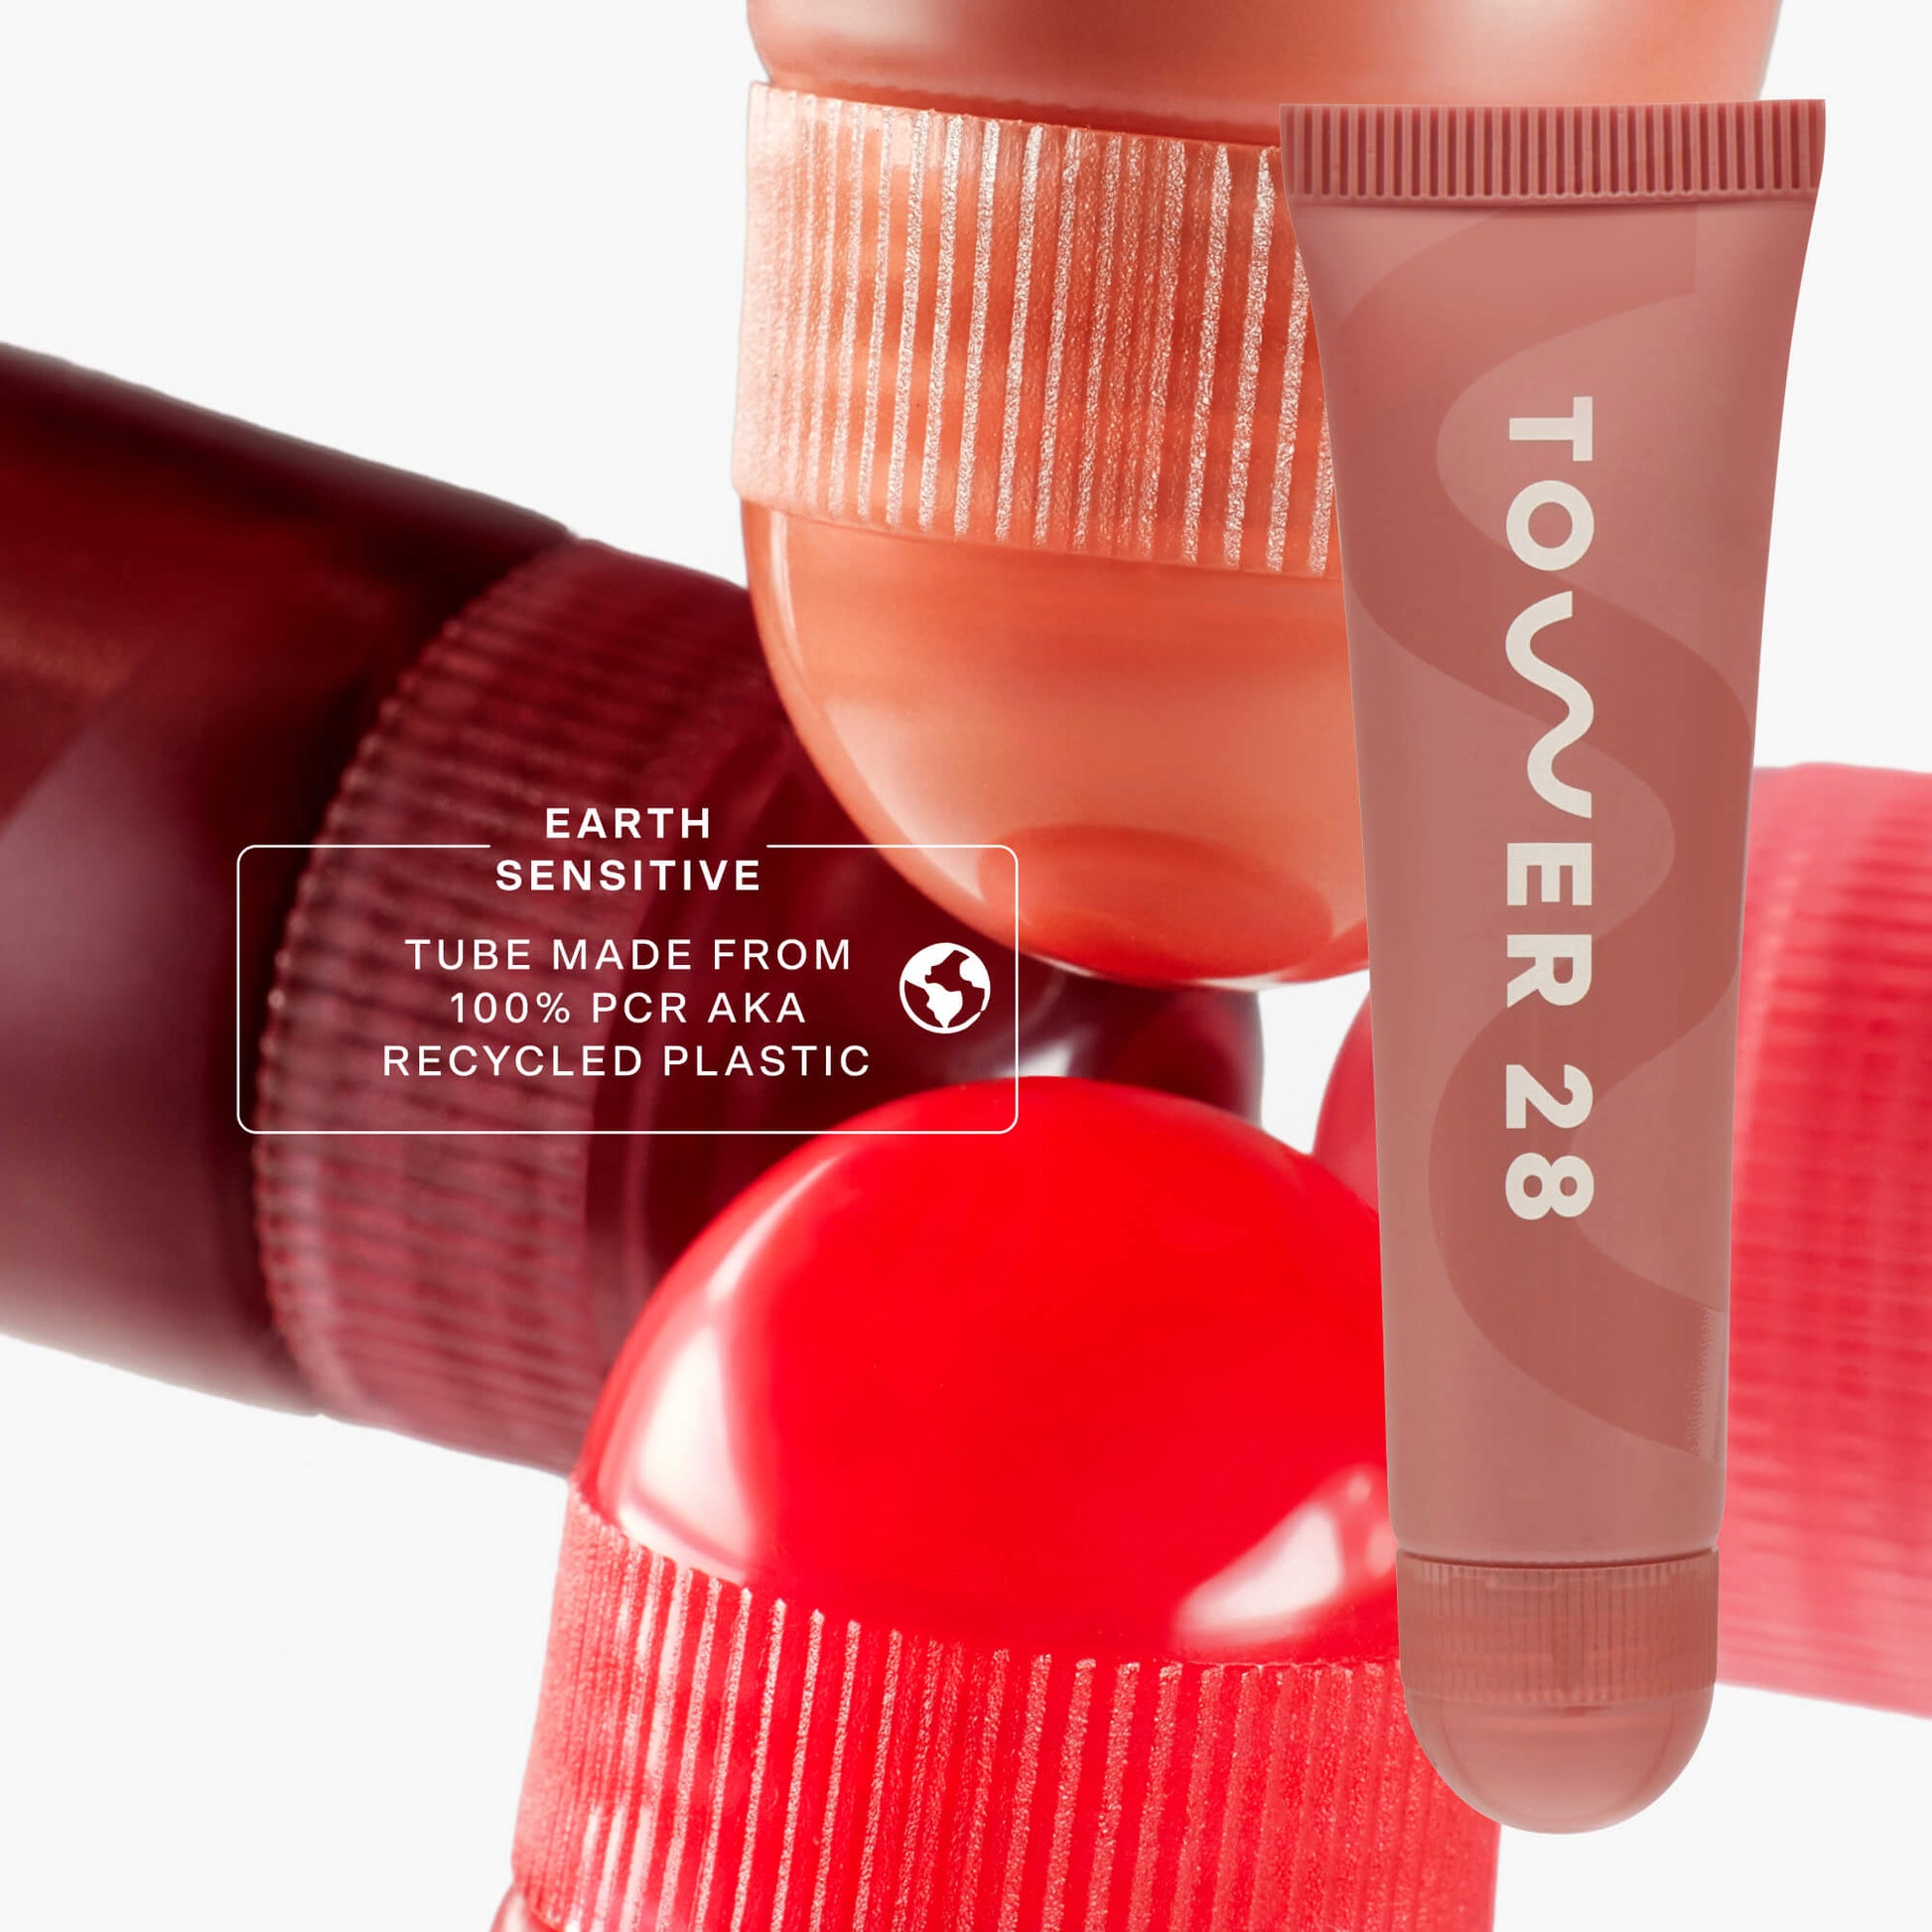 [Tower 28 Beauty LipSoftie™ Lip Treatment in Ducle de Leche has 100% recycled plastic packaging.